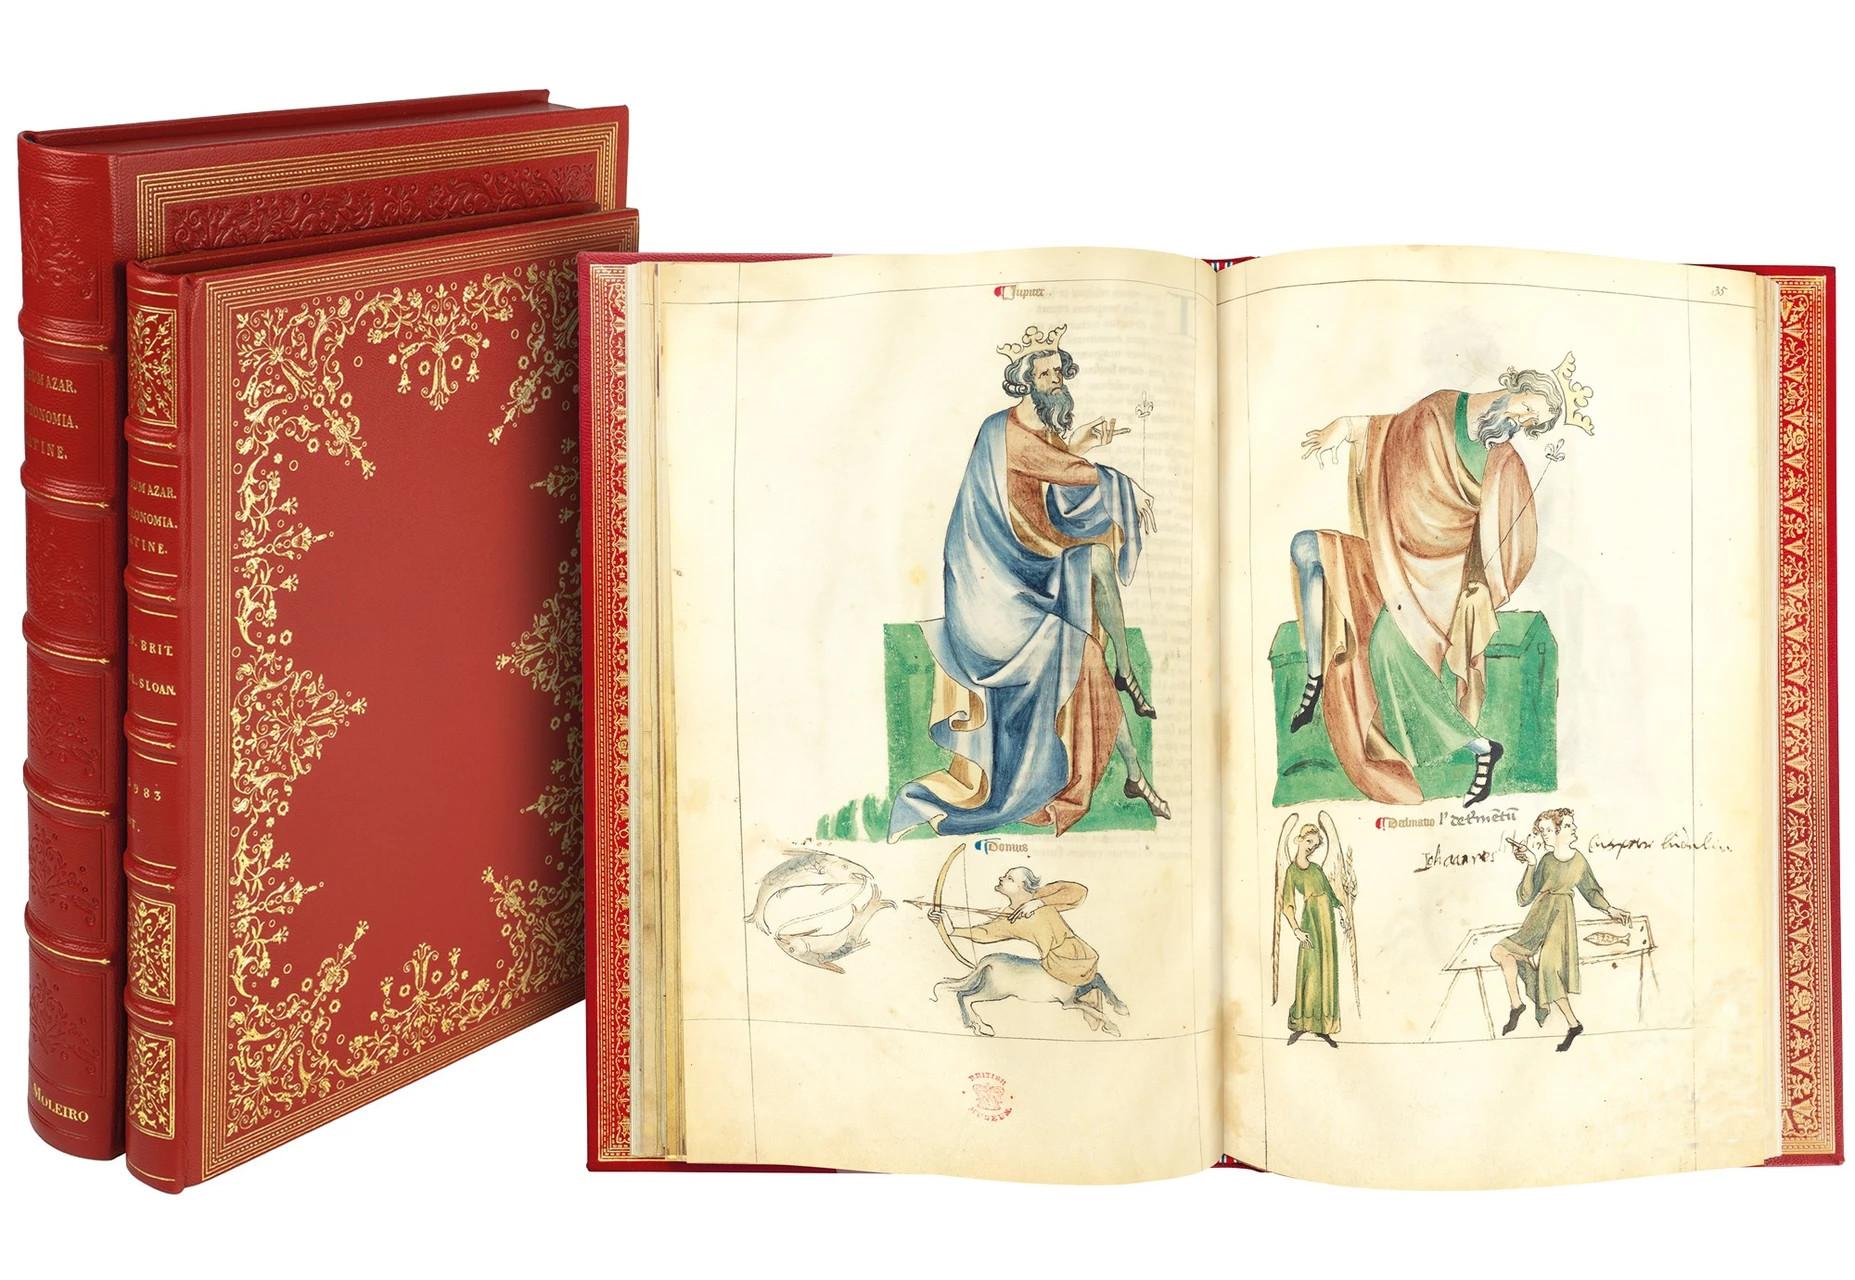 Dutch Liber Astrologiae - Albumazar Treatise - One-time only limited-edition facsimile For Sale